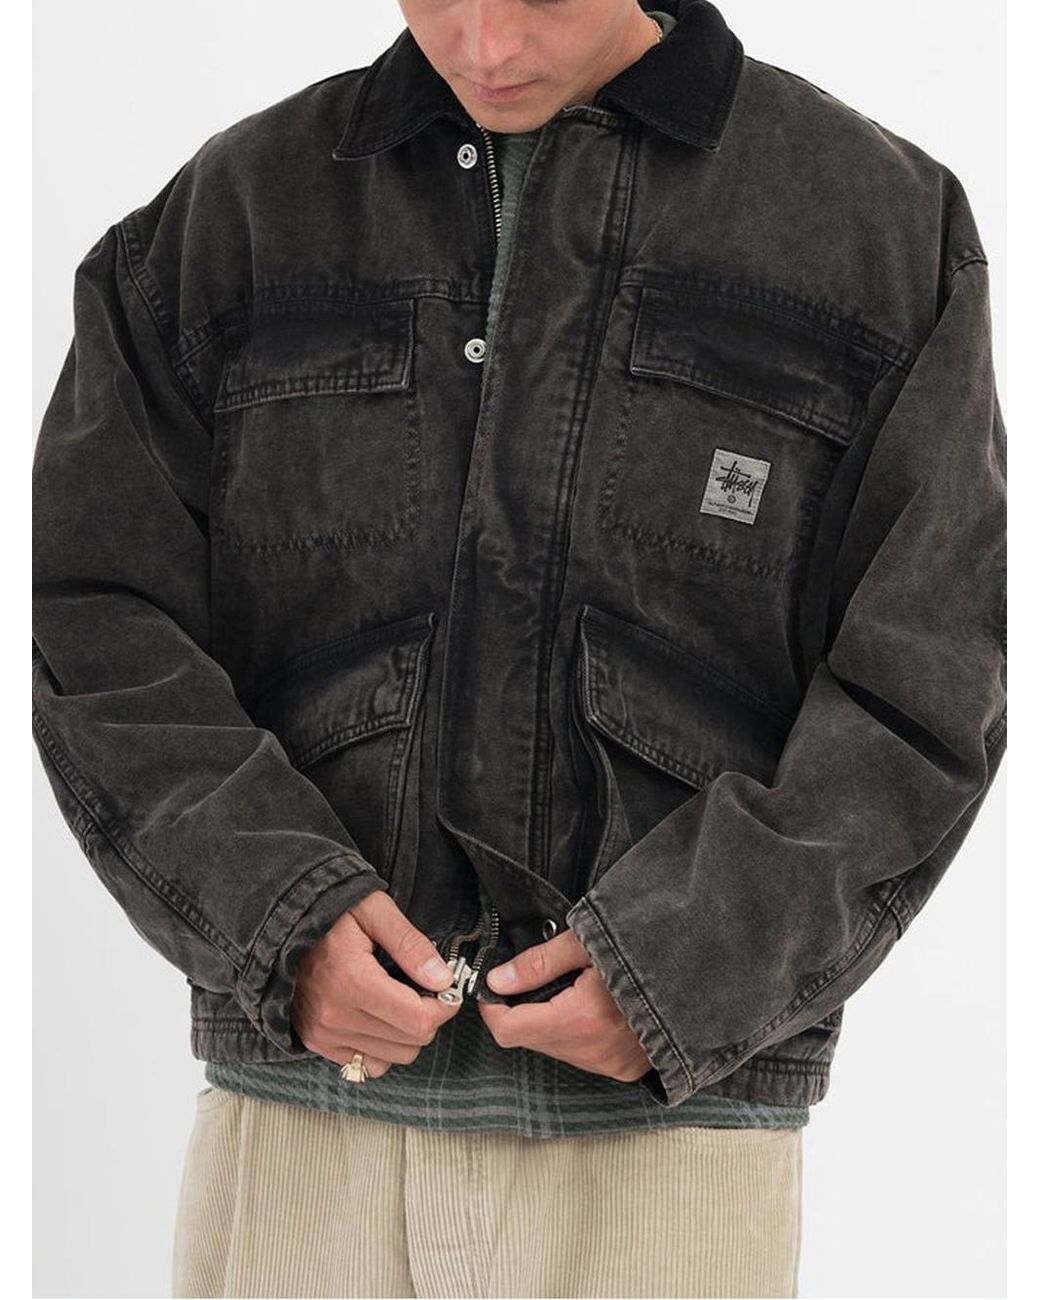 Stussy Washed Canvas Shop Jacket Black In Cotton | Lyst